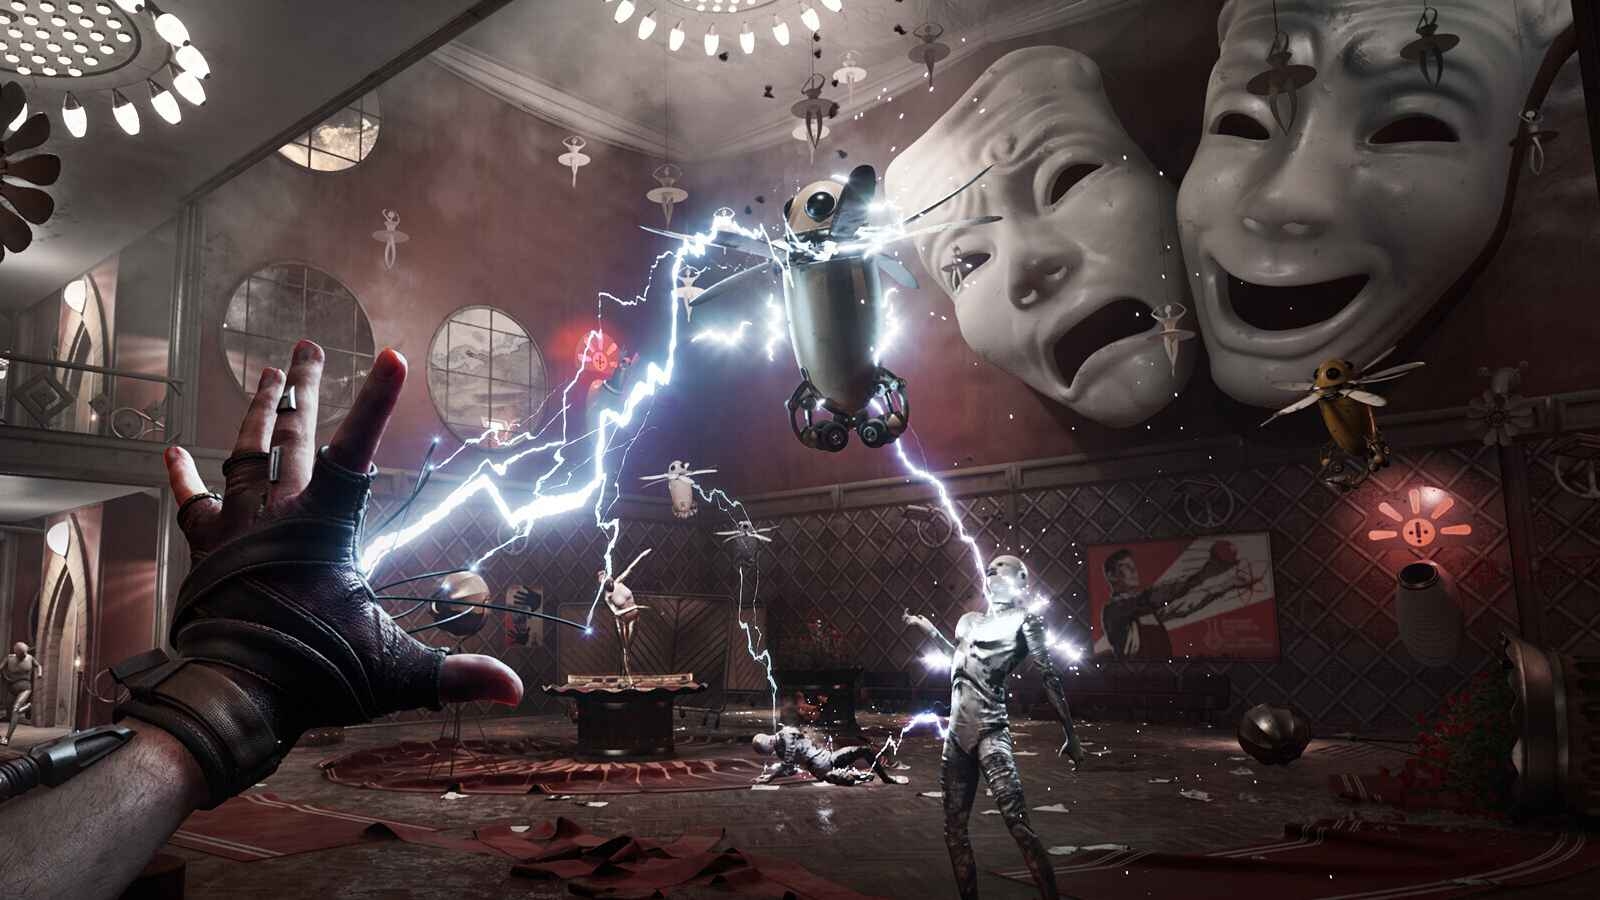 Preview: Atomic Heart